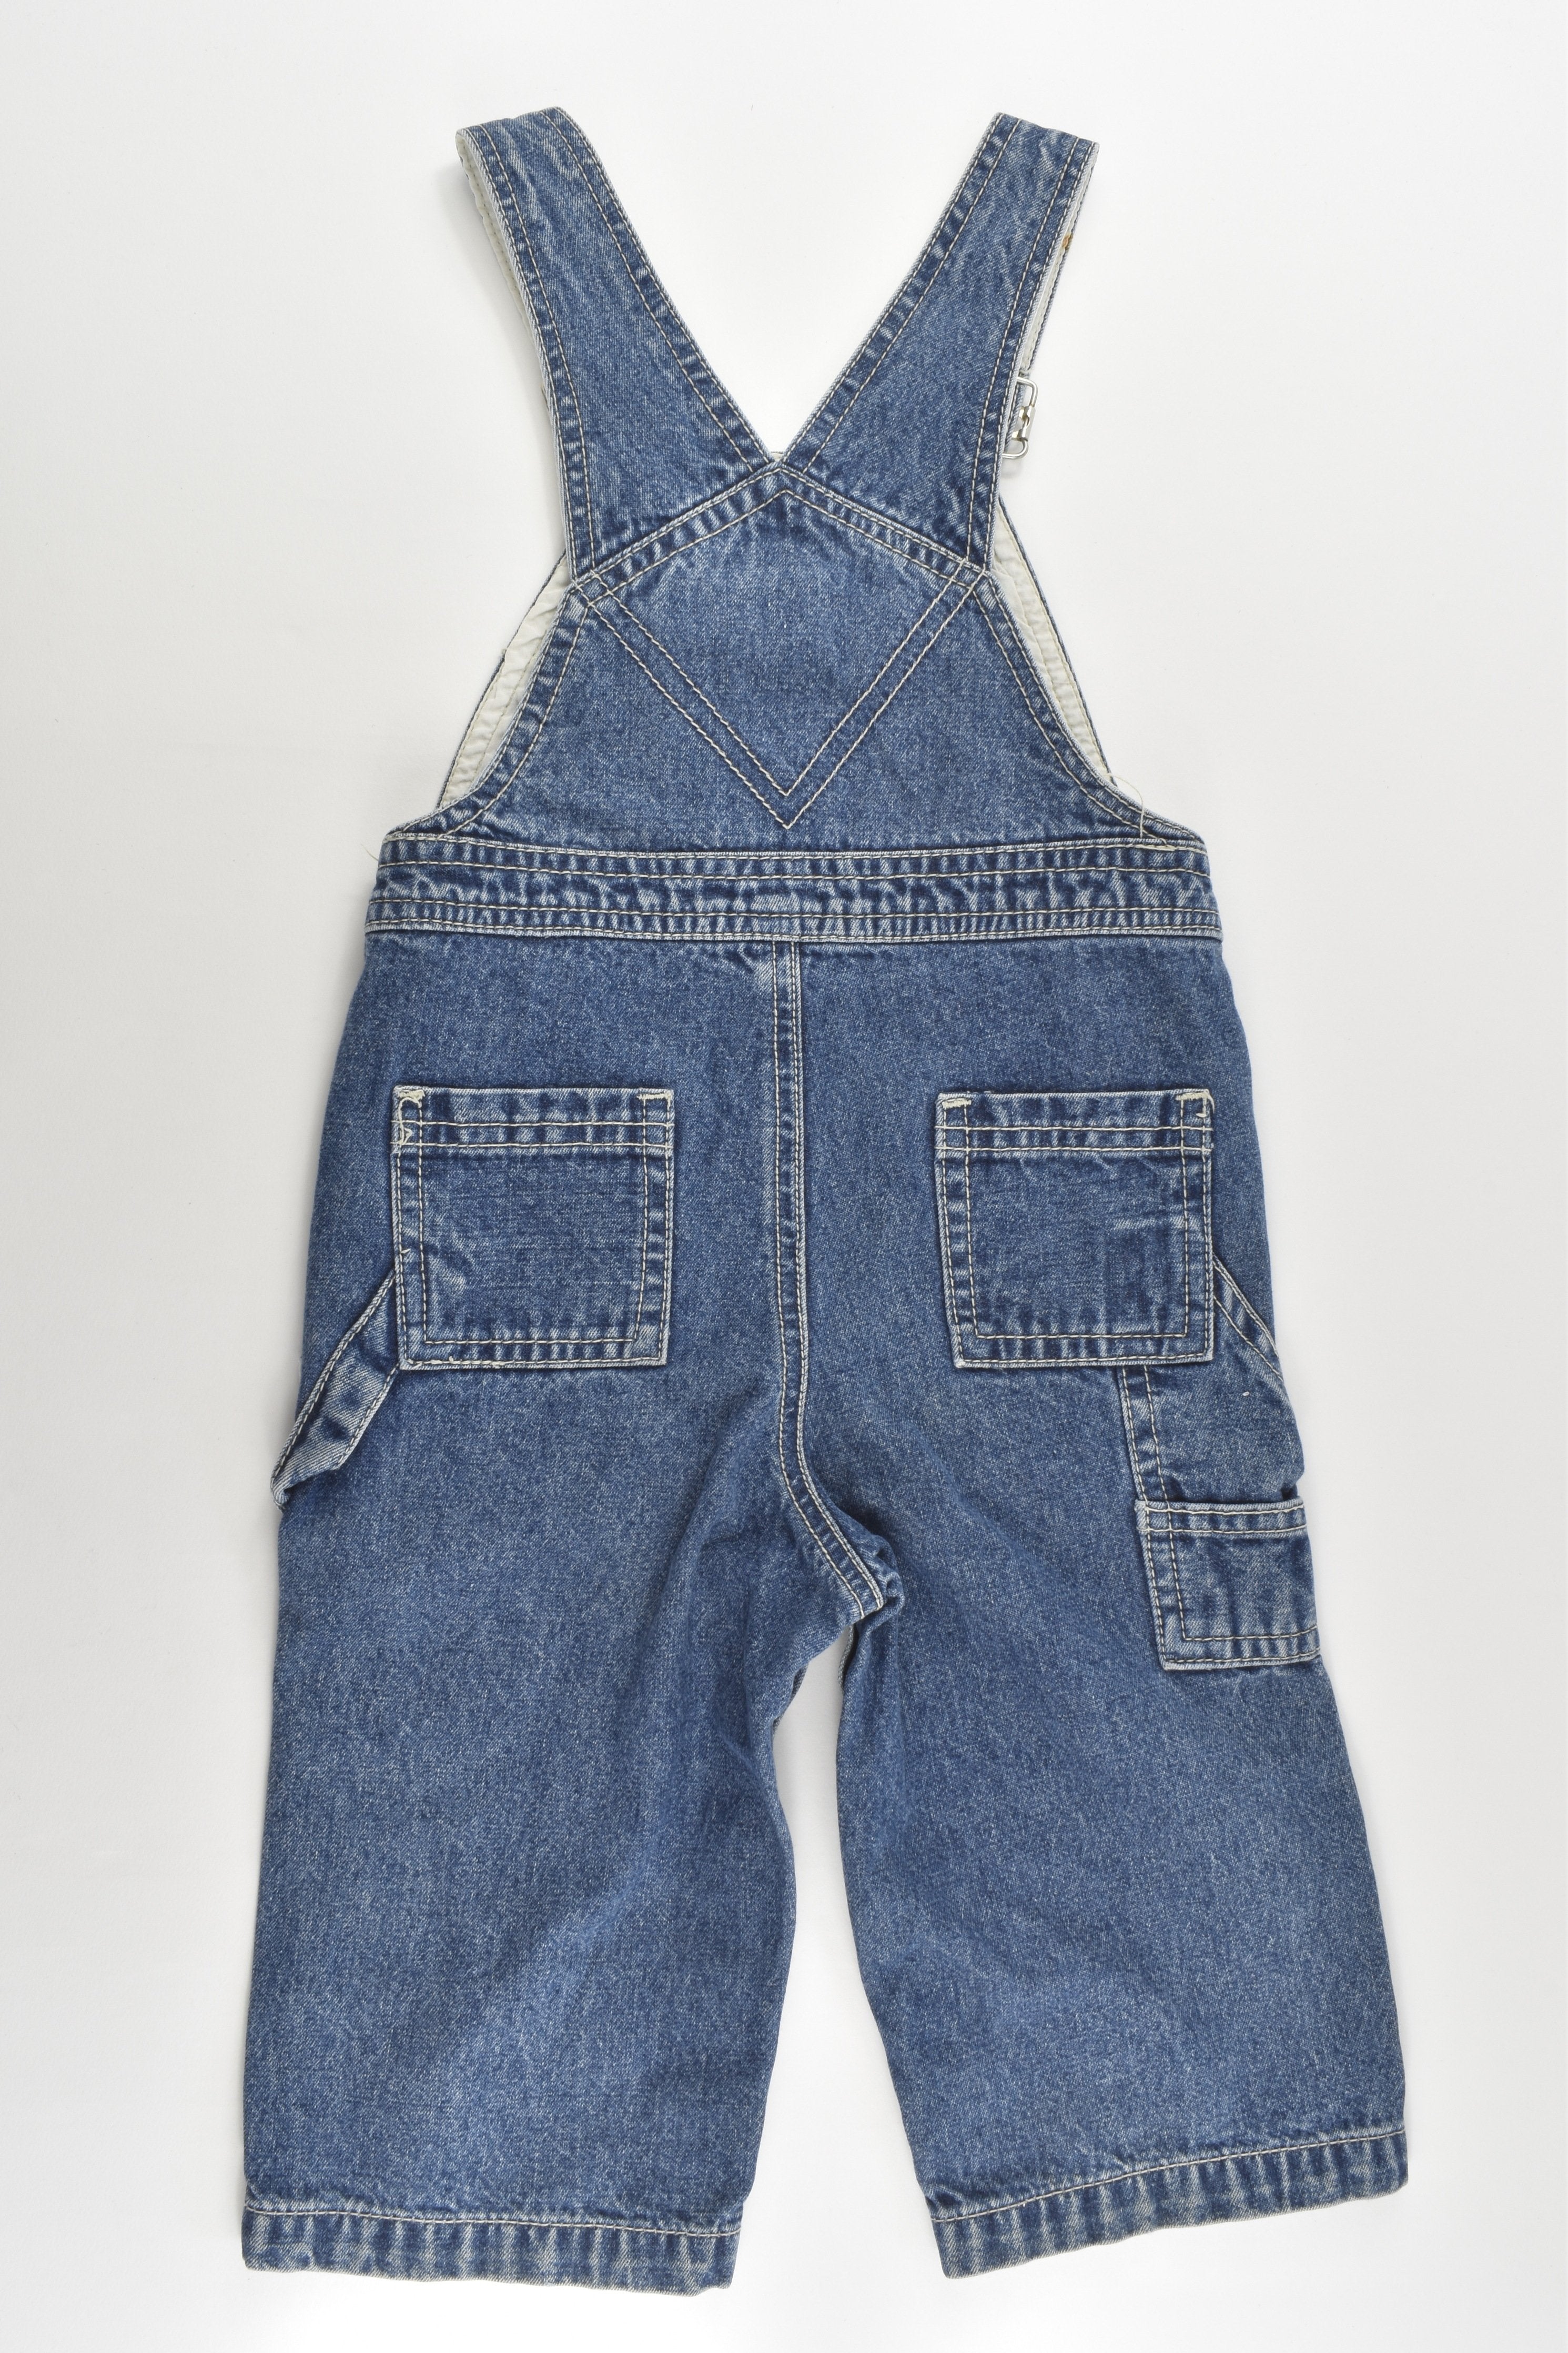 Denim Overalls Painted Dungarees Elephant Toucan Giraffe - Etsy Australia |  Painted denim, Baby boy jeans, Painted jeans